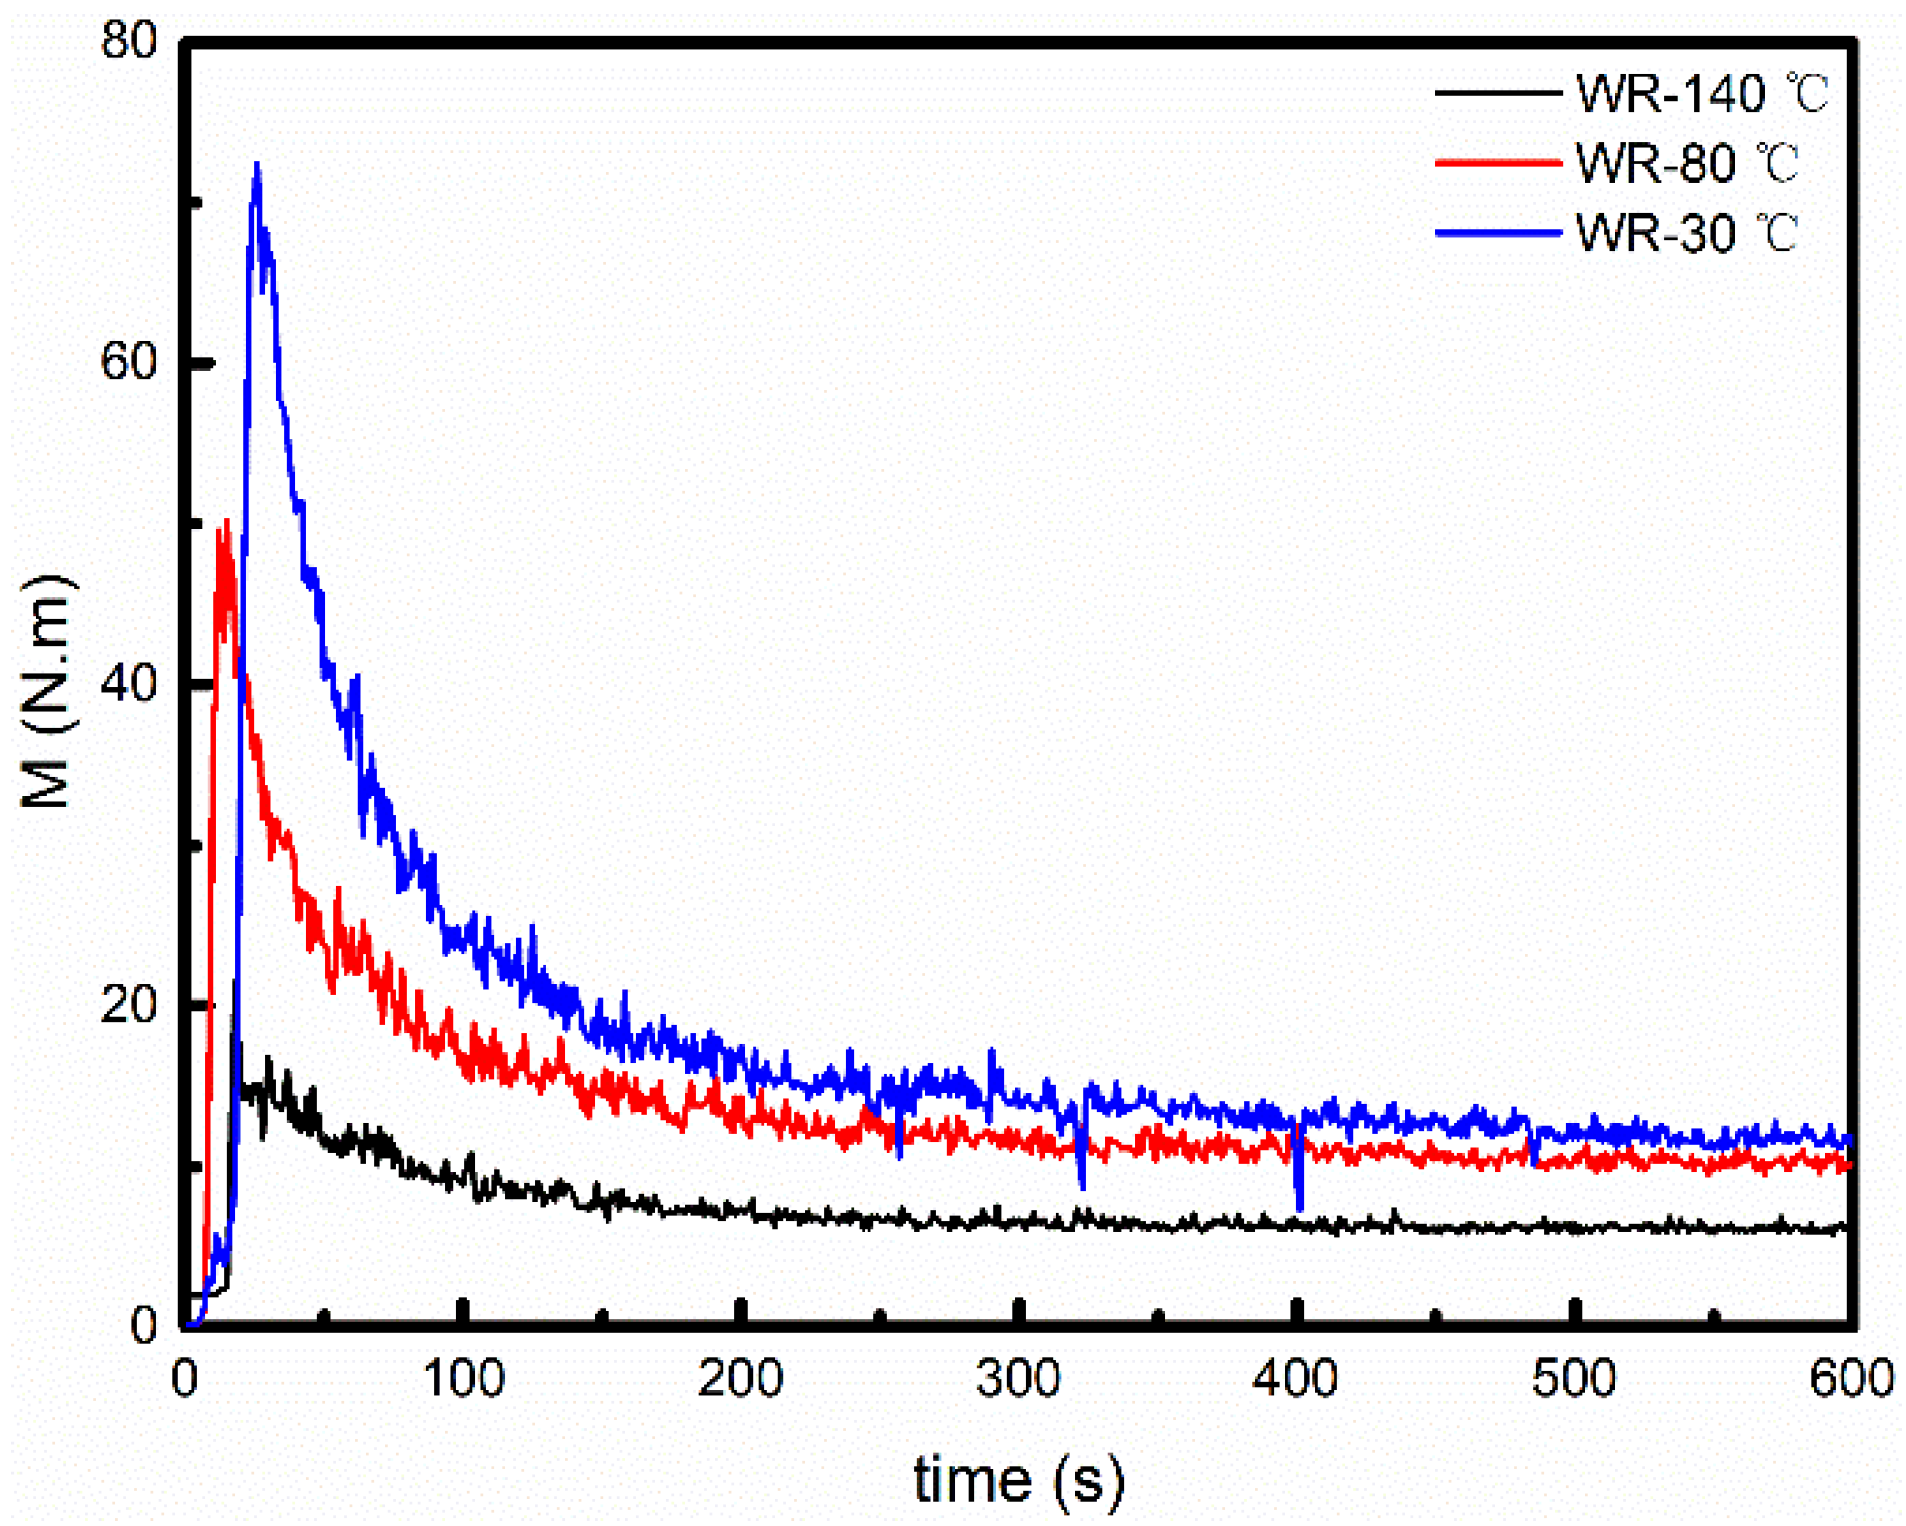 Torque (M) of WR samples as a function of grinding time at different temperatures.